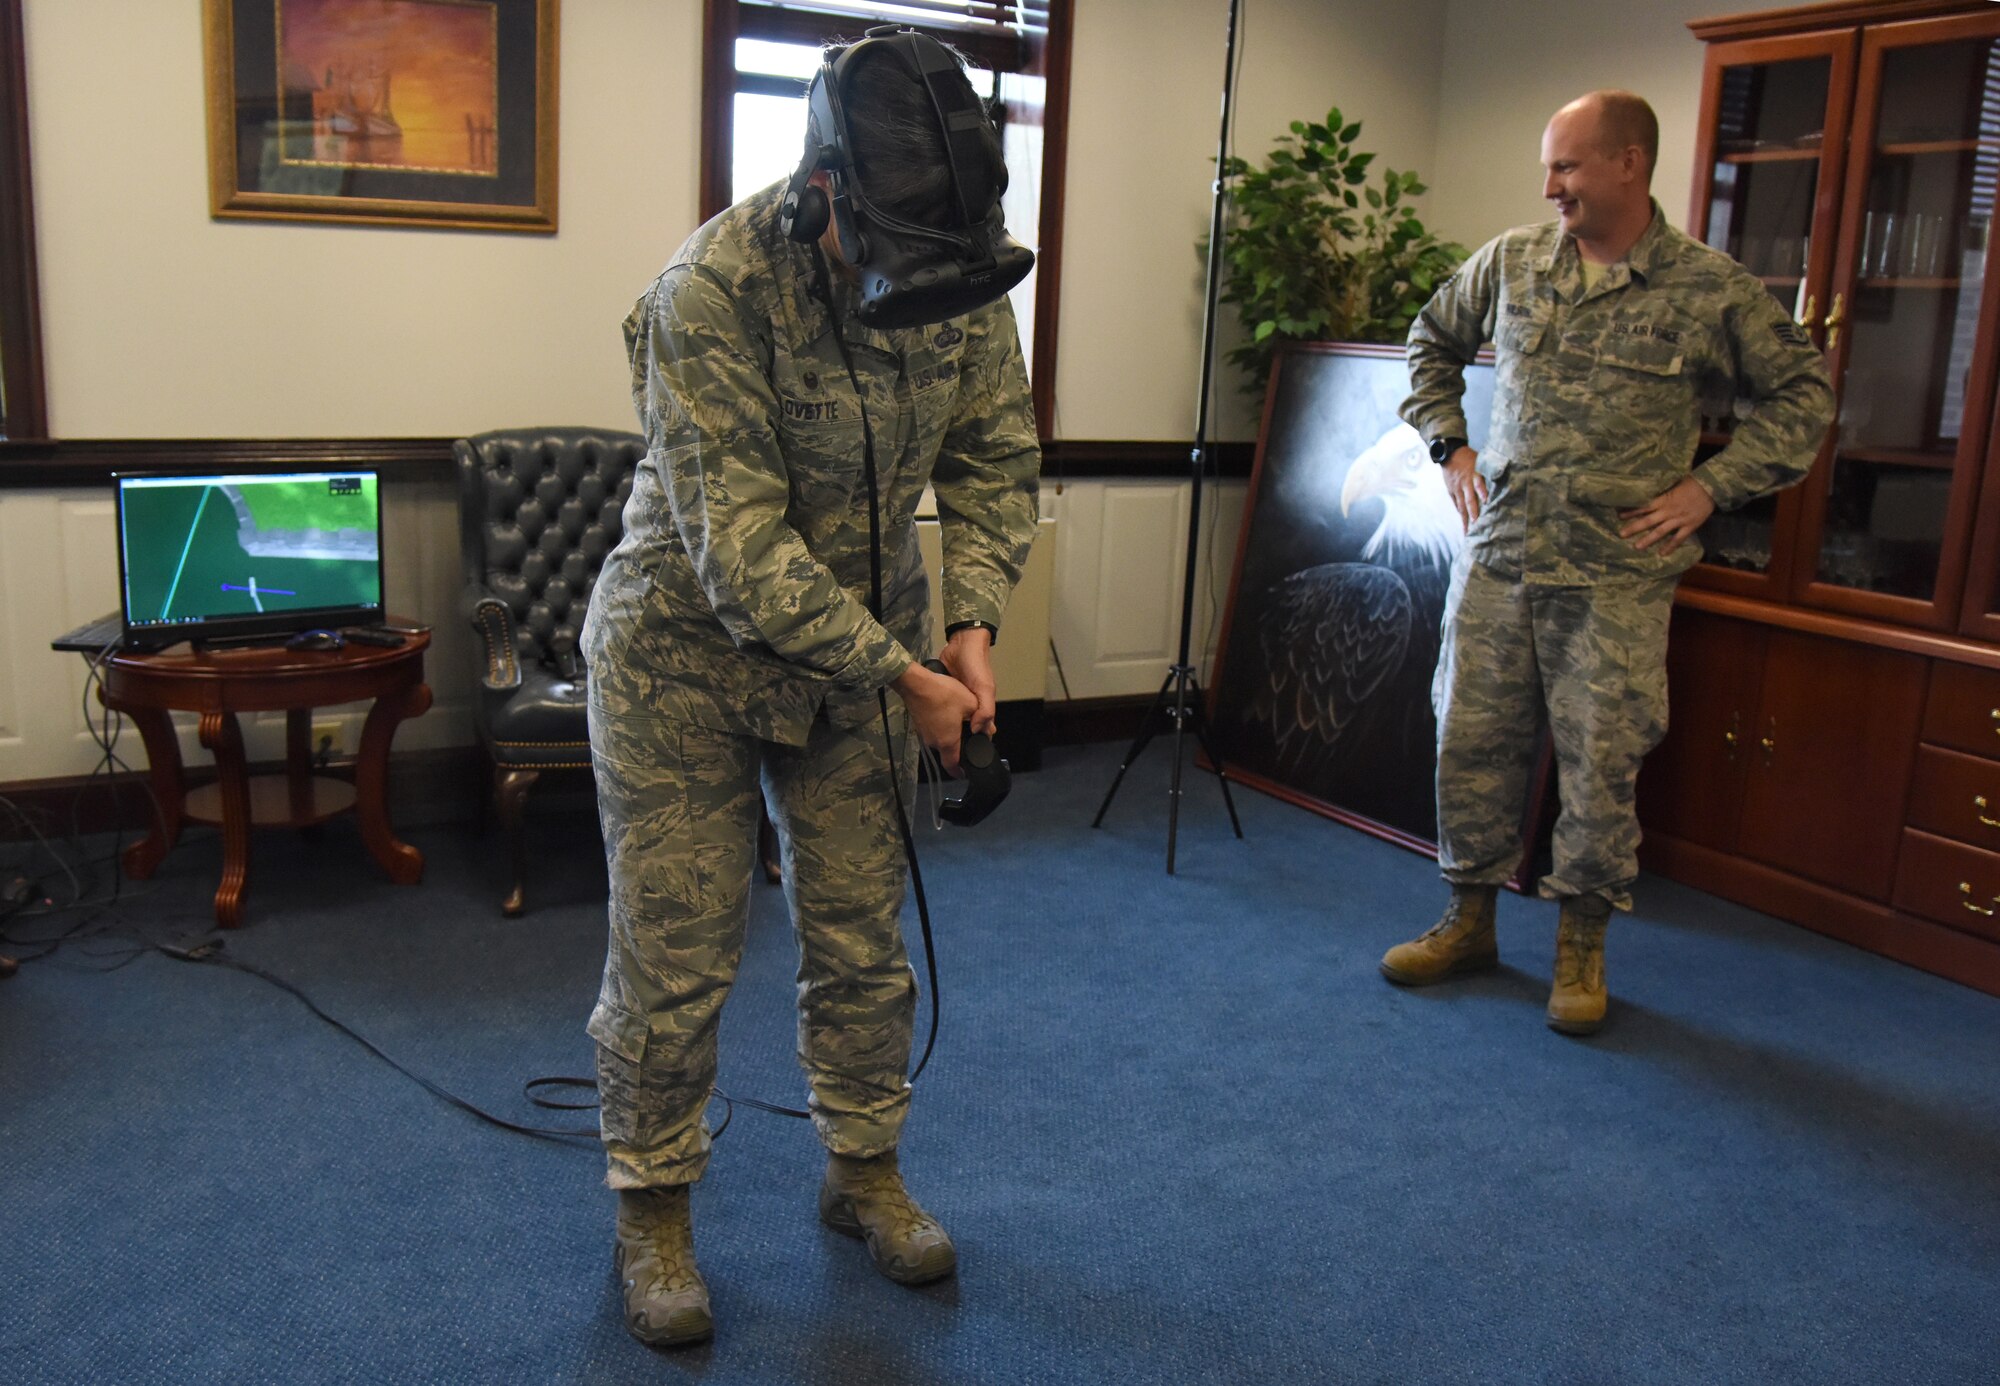 U.S. Air Force Col. Debra Lovette, 81st Training Wing commander, participates in a virtual reality demonstration in the 81st TRW headquarters building at Keesler Air Force Base, Mississippi, May 4, 2018. The 81st Training Group has implemented augmented and virtual reality into training, such as airfield, weather and air traffic control training. (U.S. Air Force photo by Kemberly Groue)